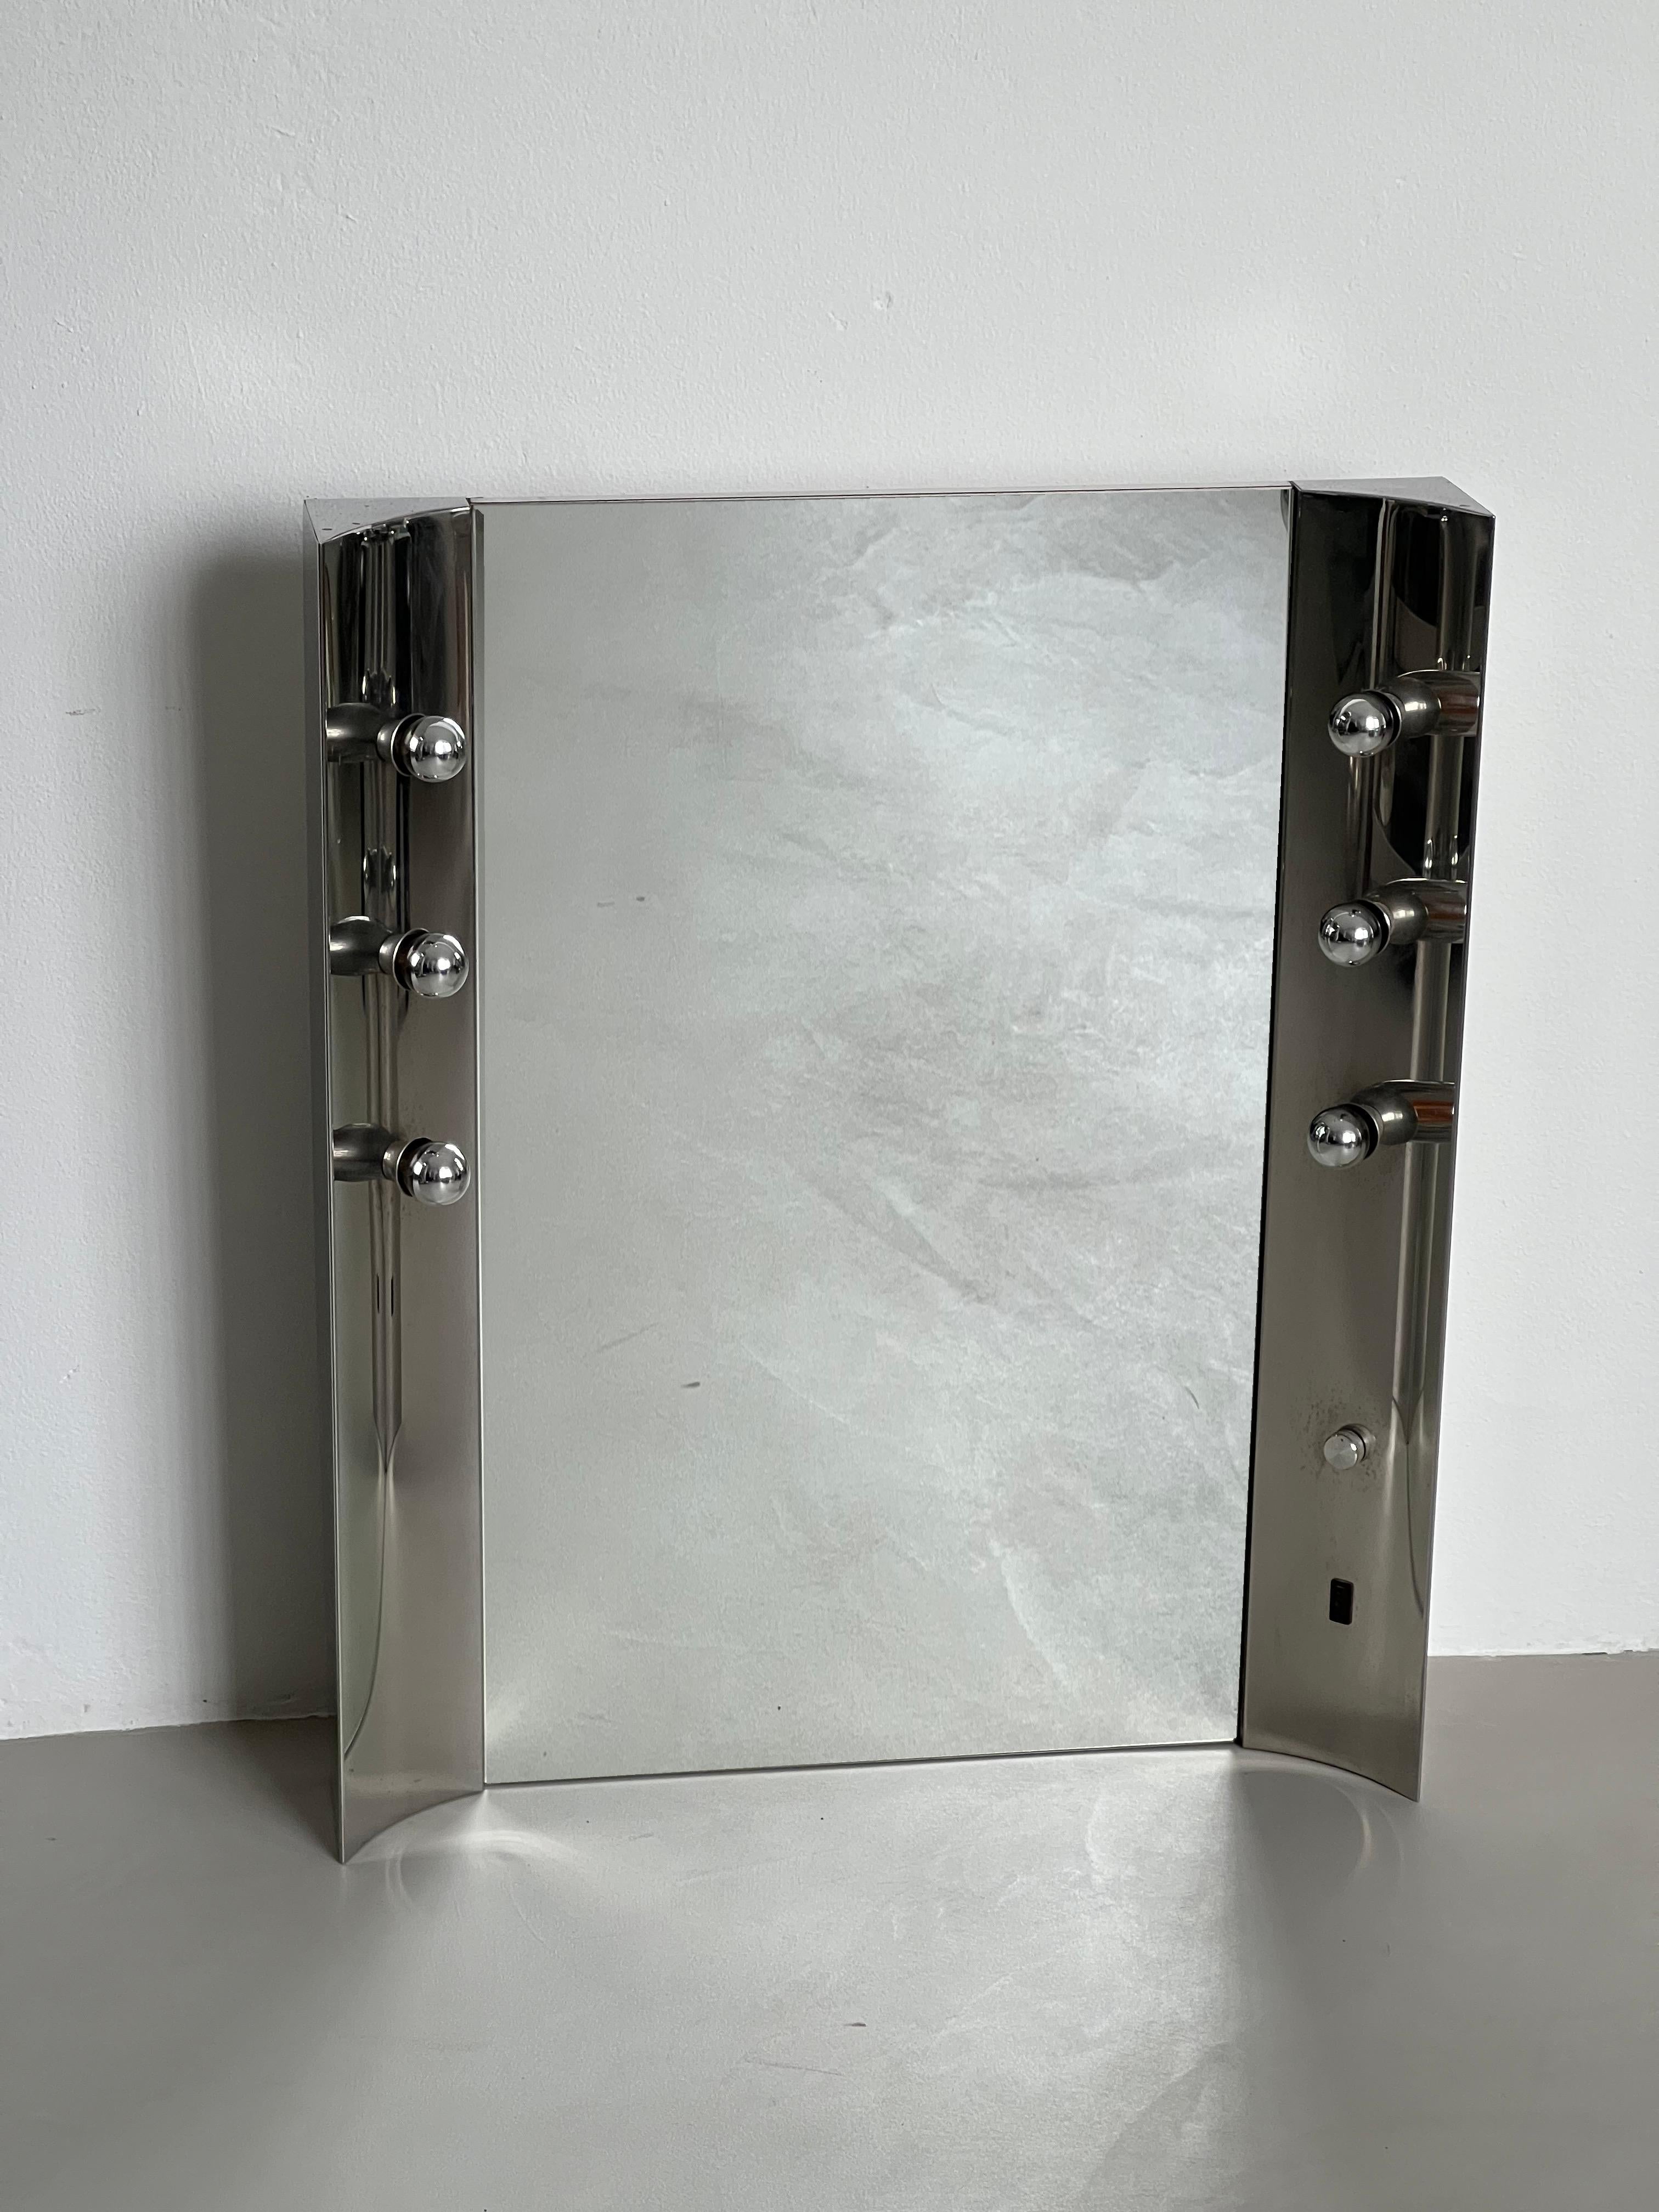 Offered for sale is a vintage Space Age vanity mirror, with six integrated light bulbs and a plug to connect a razor or hair dryer. The piece is big, and is suitable both for a bathroom and a powder/changing room, or even for an entrance or to add